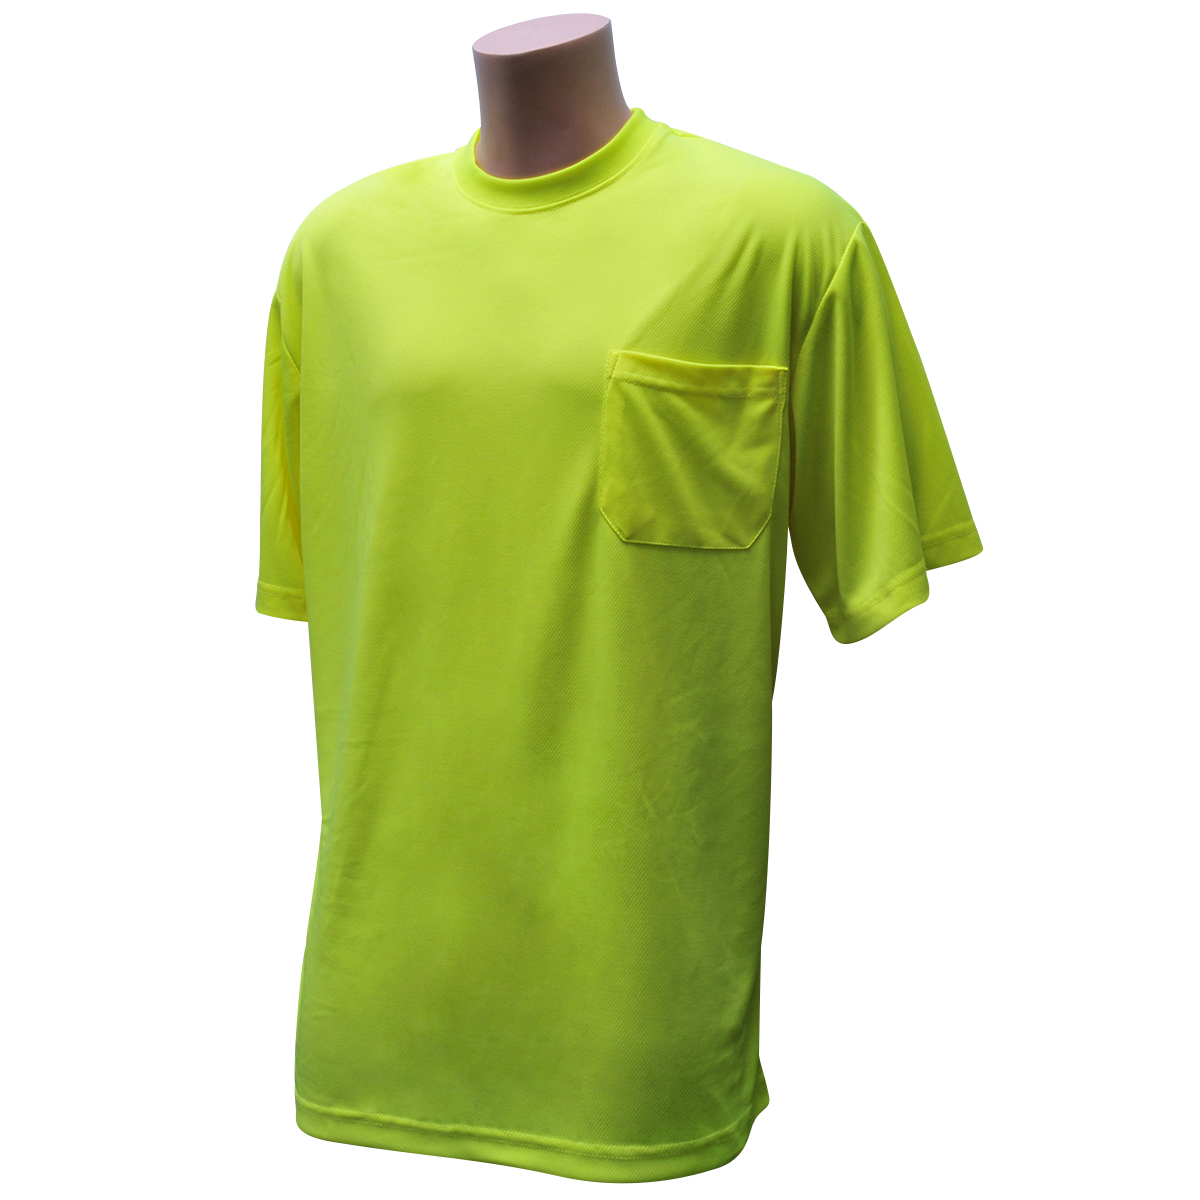 BlackCanyon Outfitters Non Rated Short Sleeve Pocket T-Shirt Lime Green BCOSSTYXL Brightly Colored Shirt Fast-Dry Fabric XL